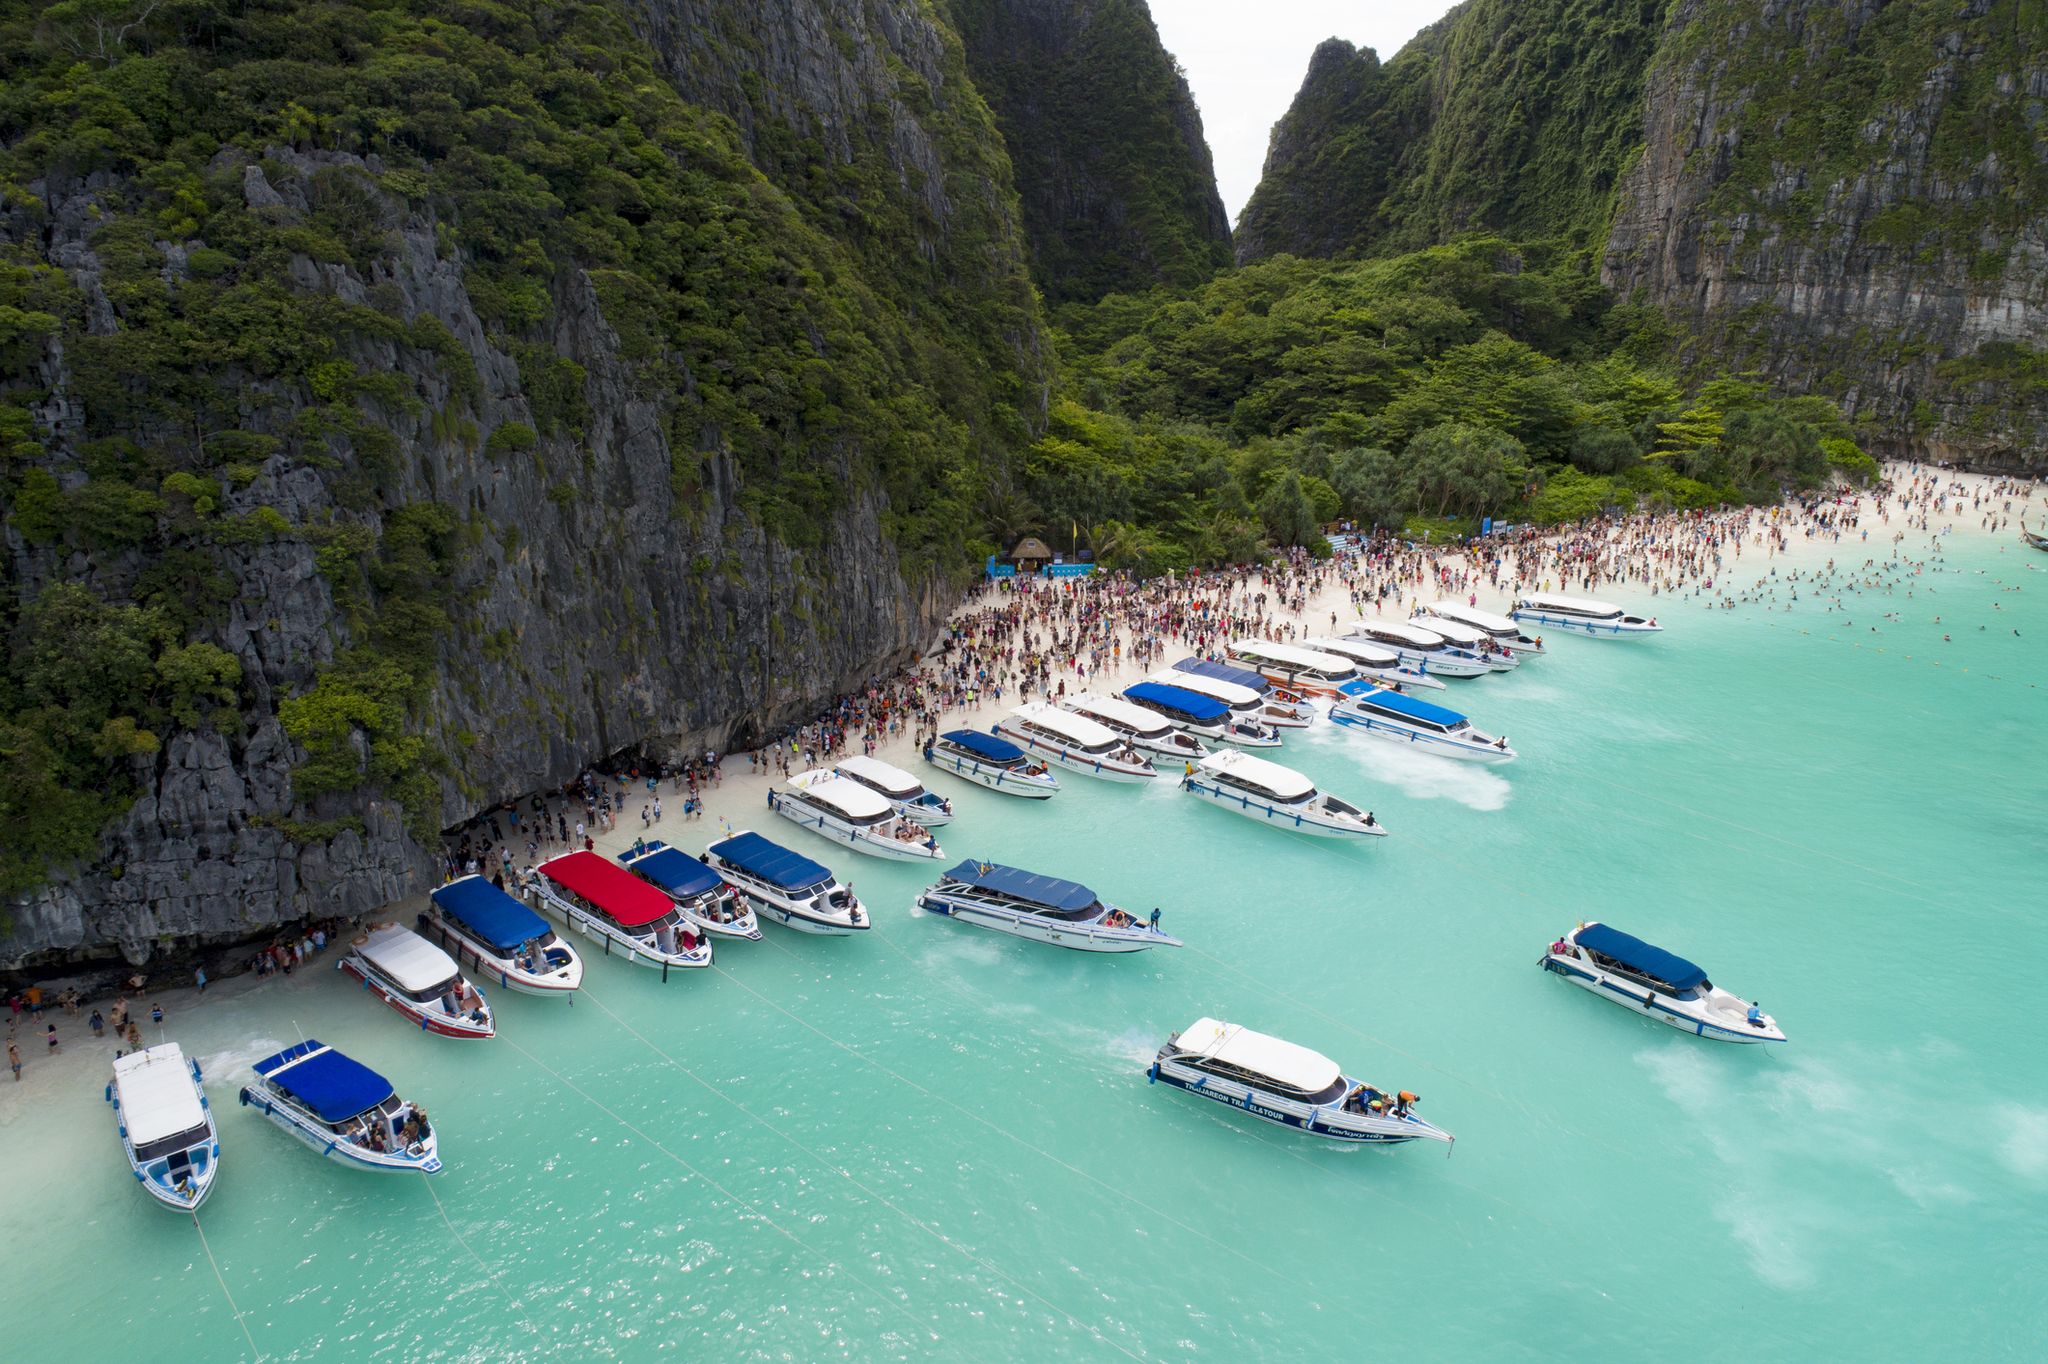 Thailand's famous Maya Bay from 'The Beach' closes to tourists